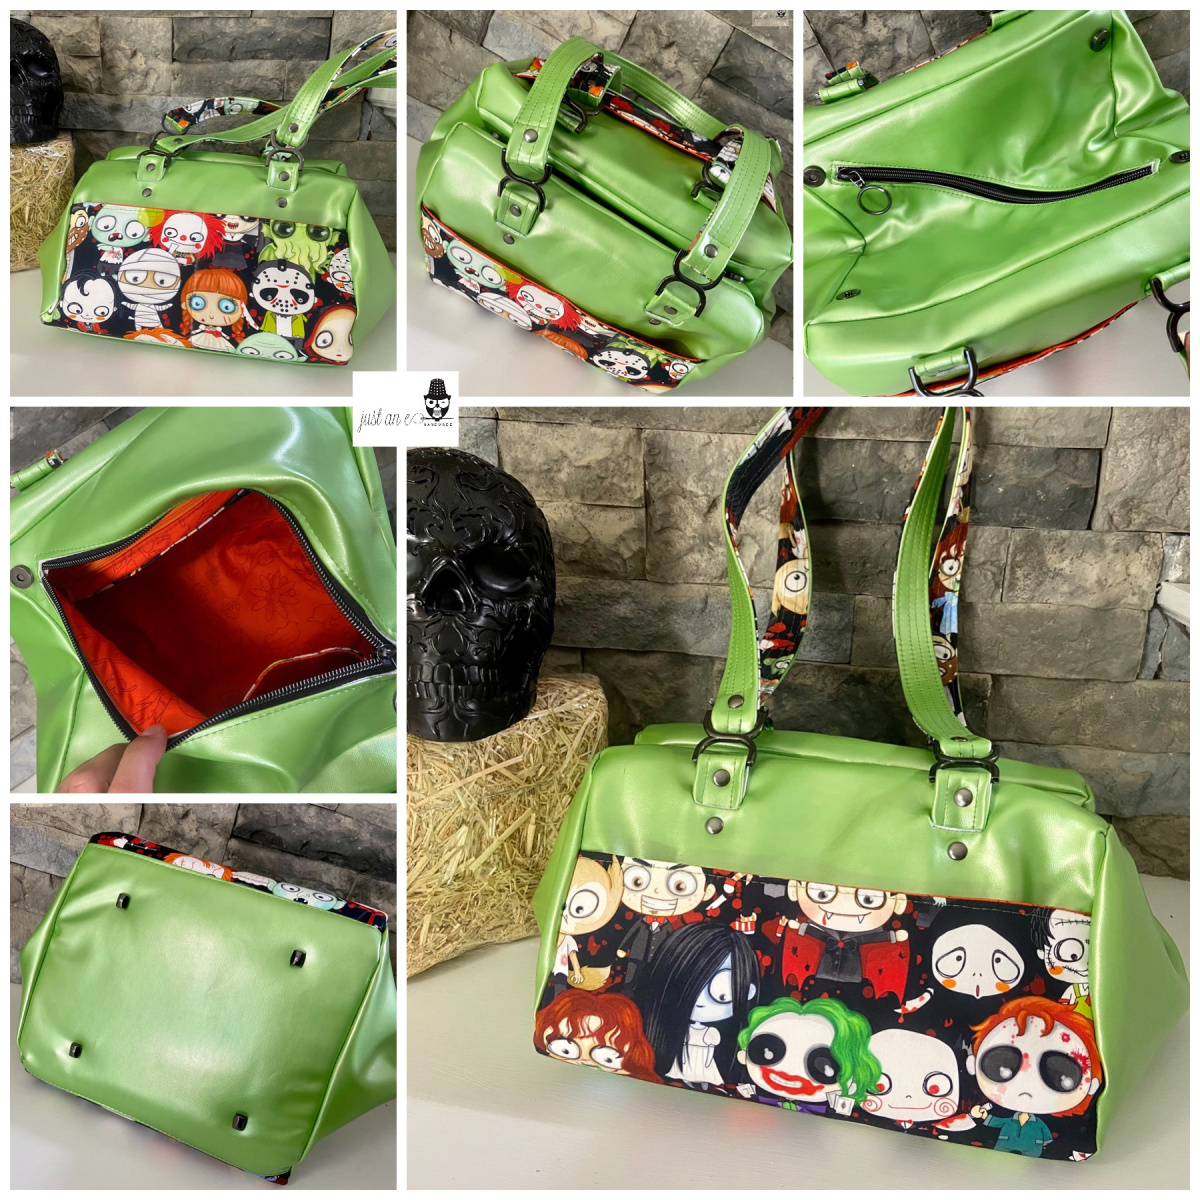 The small Super Nova Satchel made by Abbe Coury from Just An E Sewing